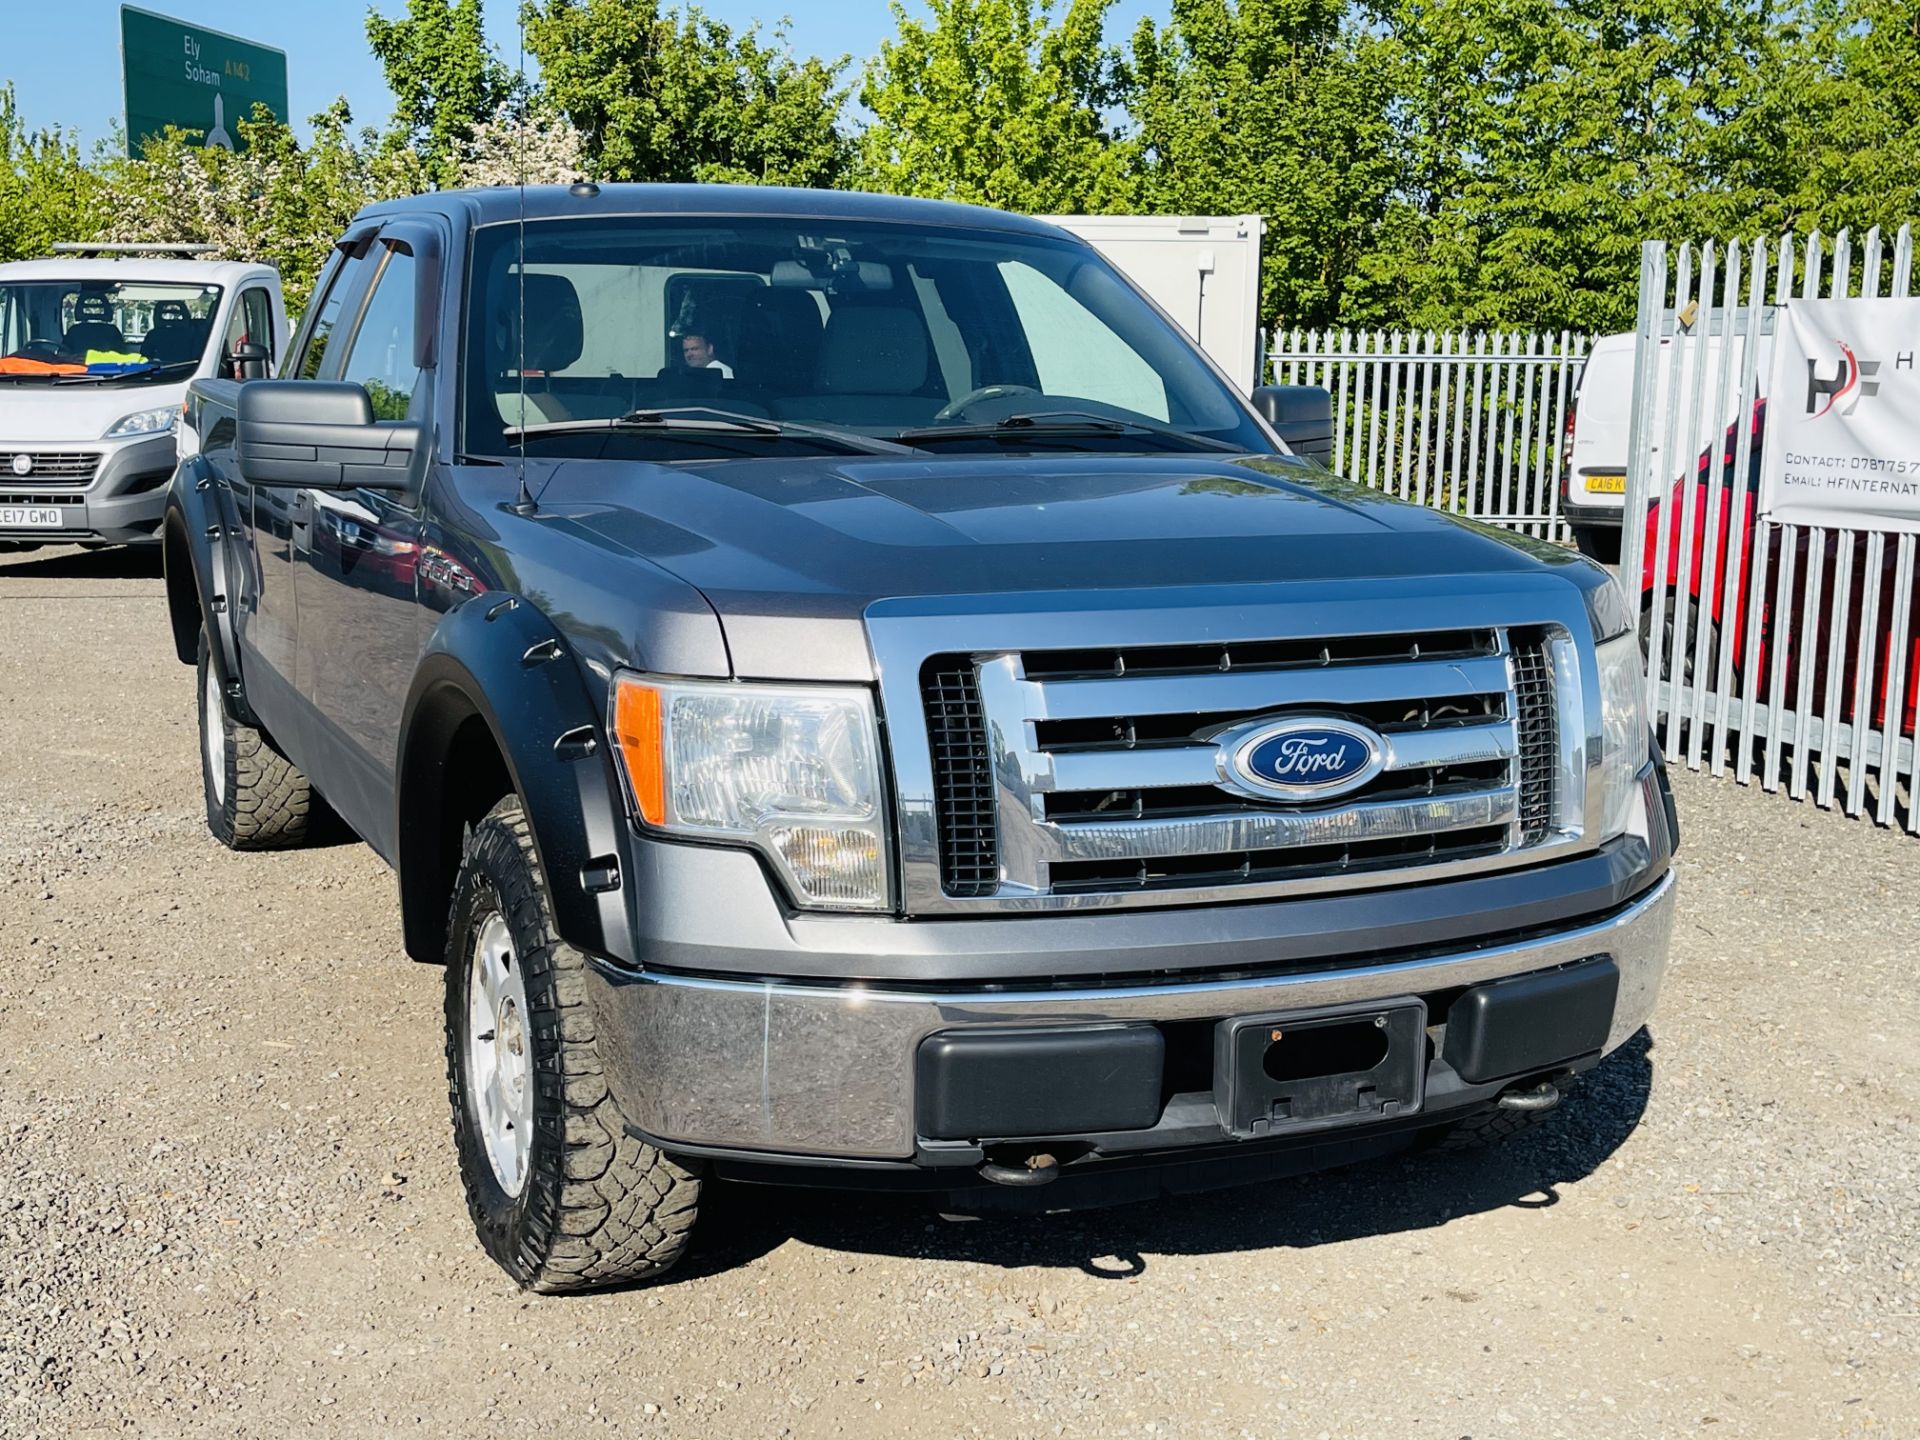 Ford F-150 4.6L V8 XLT Super-Cab 4WD 2010 '2010 Year' Air Con -6 Seats NO VAT SAVE 20% - Image 2 of 14